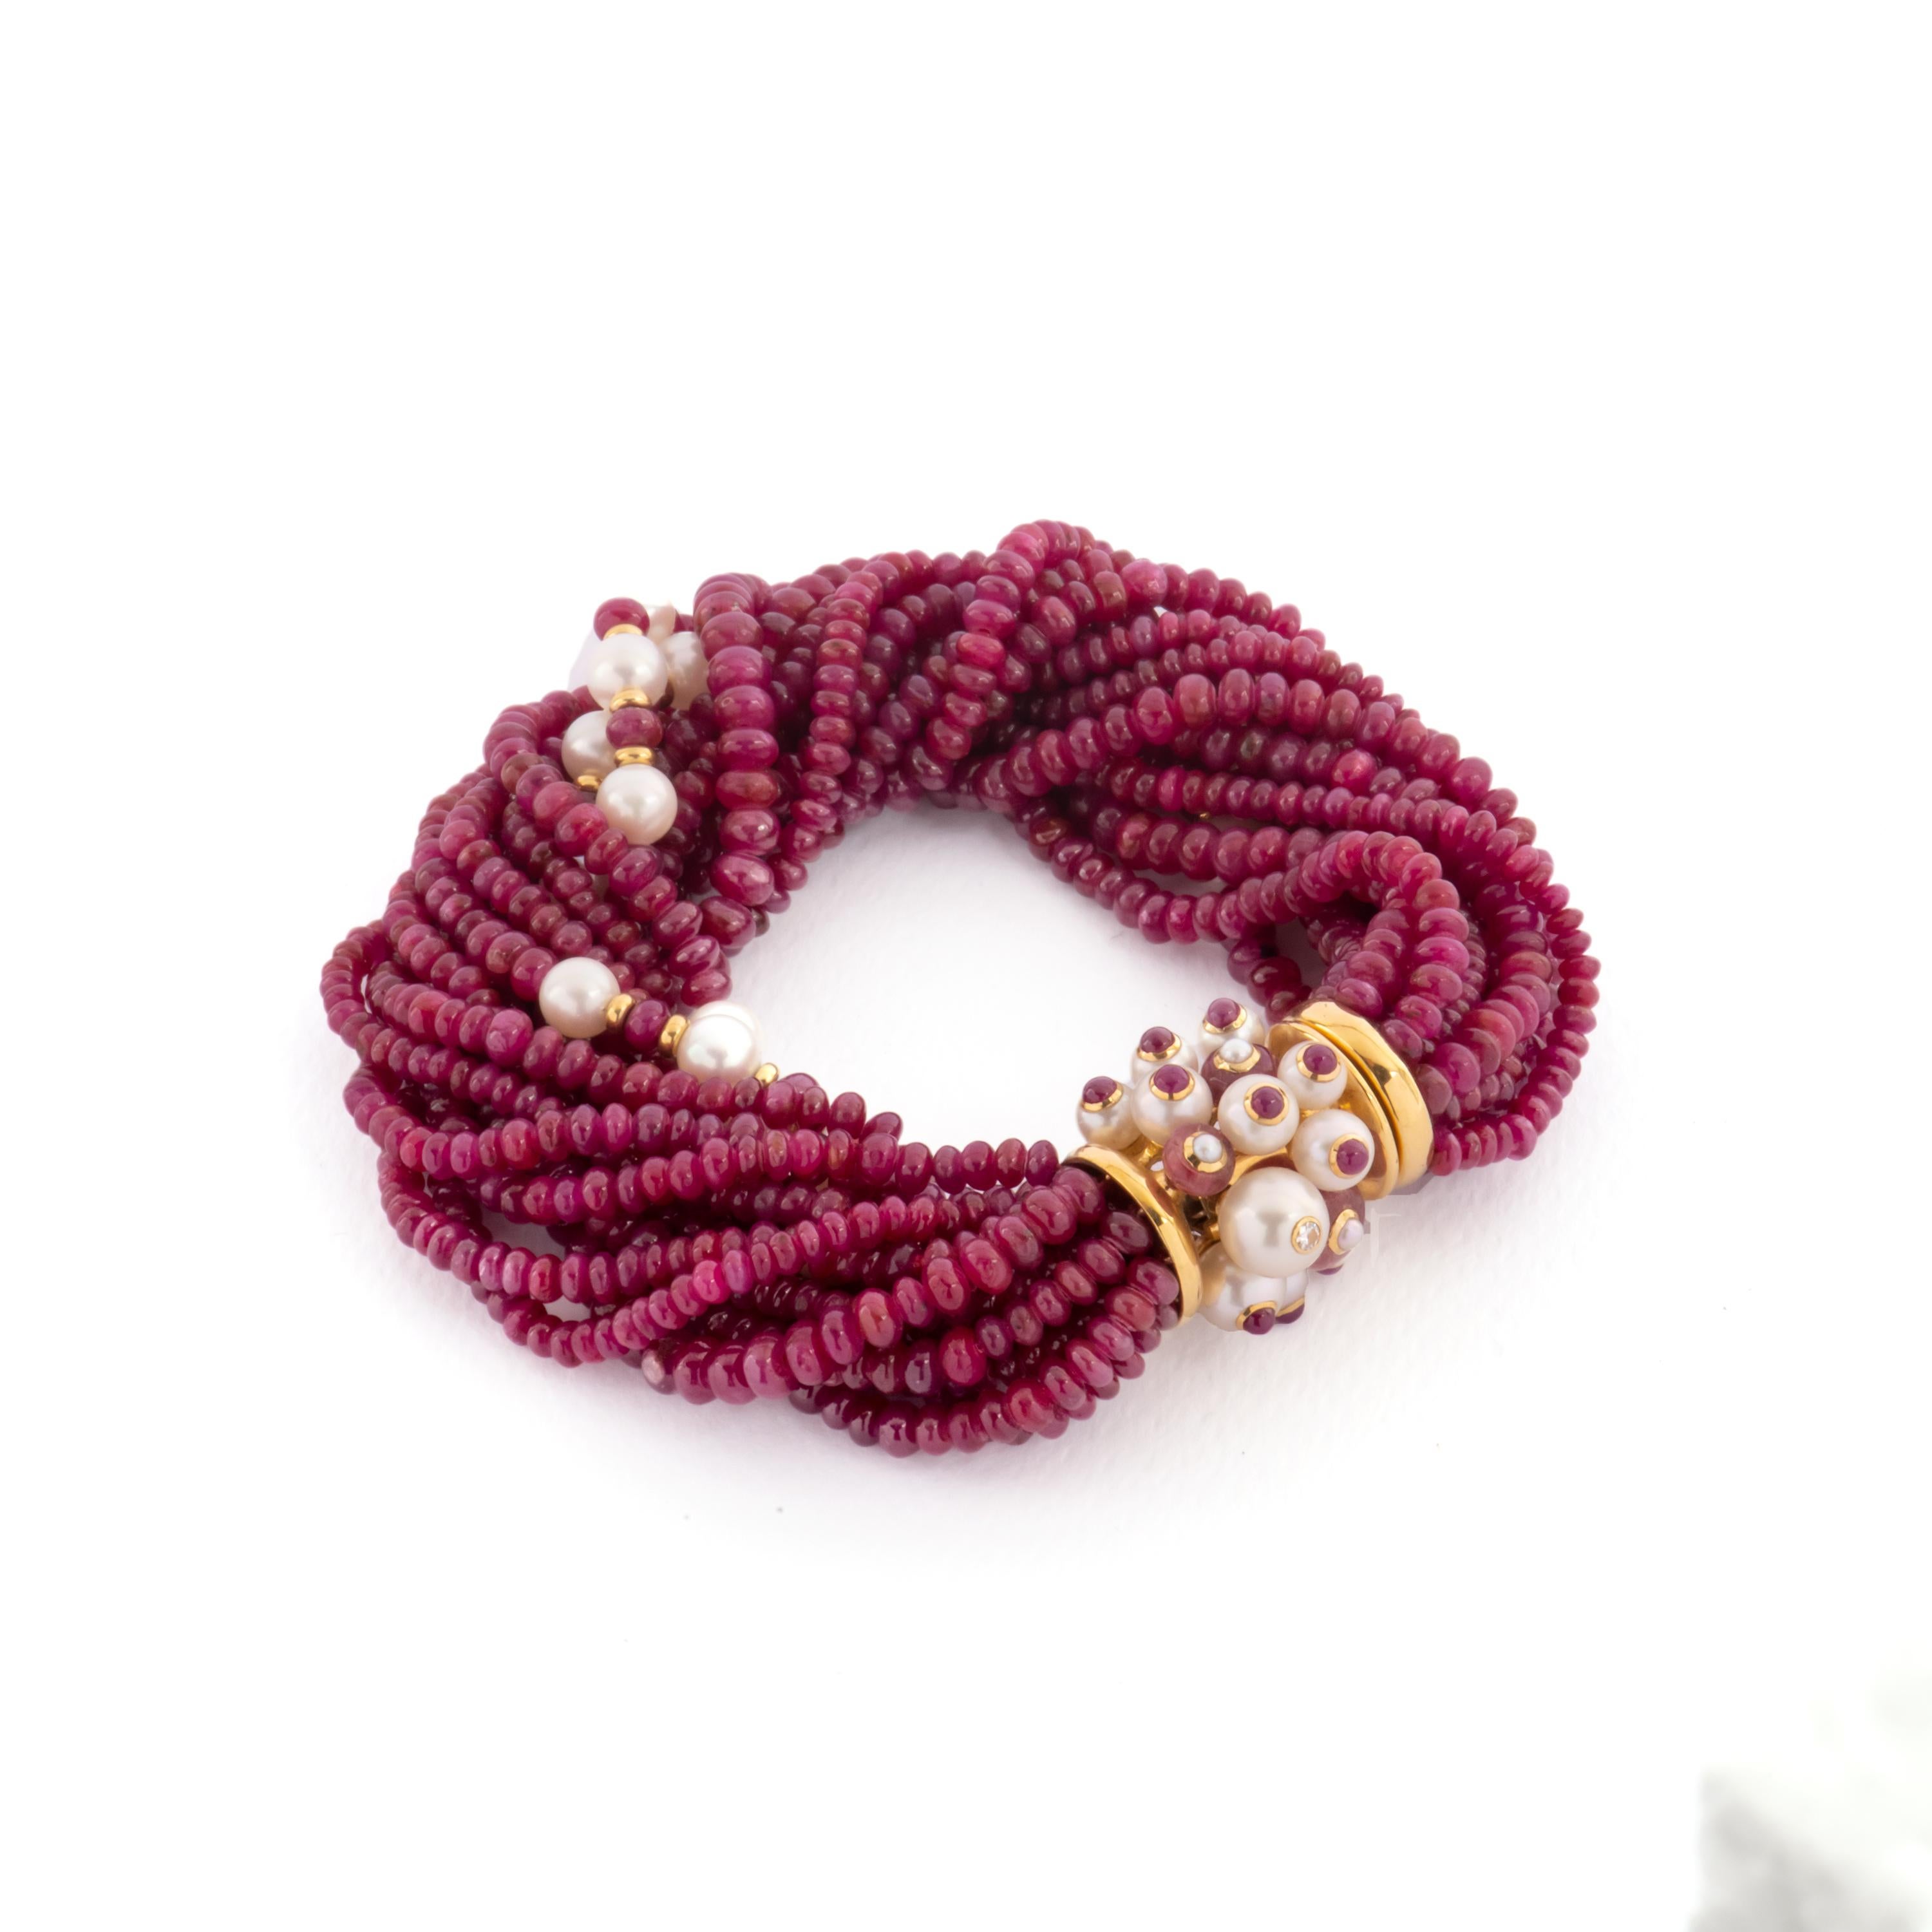 Trianon multi strand bracelet, crafted withrubies. 18k yellow gold clasp with pearls ball, also decorated with ruby cabochons and diamonds. Bracelet   Marked Trianon, 